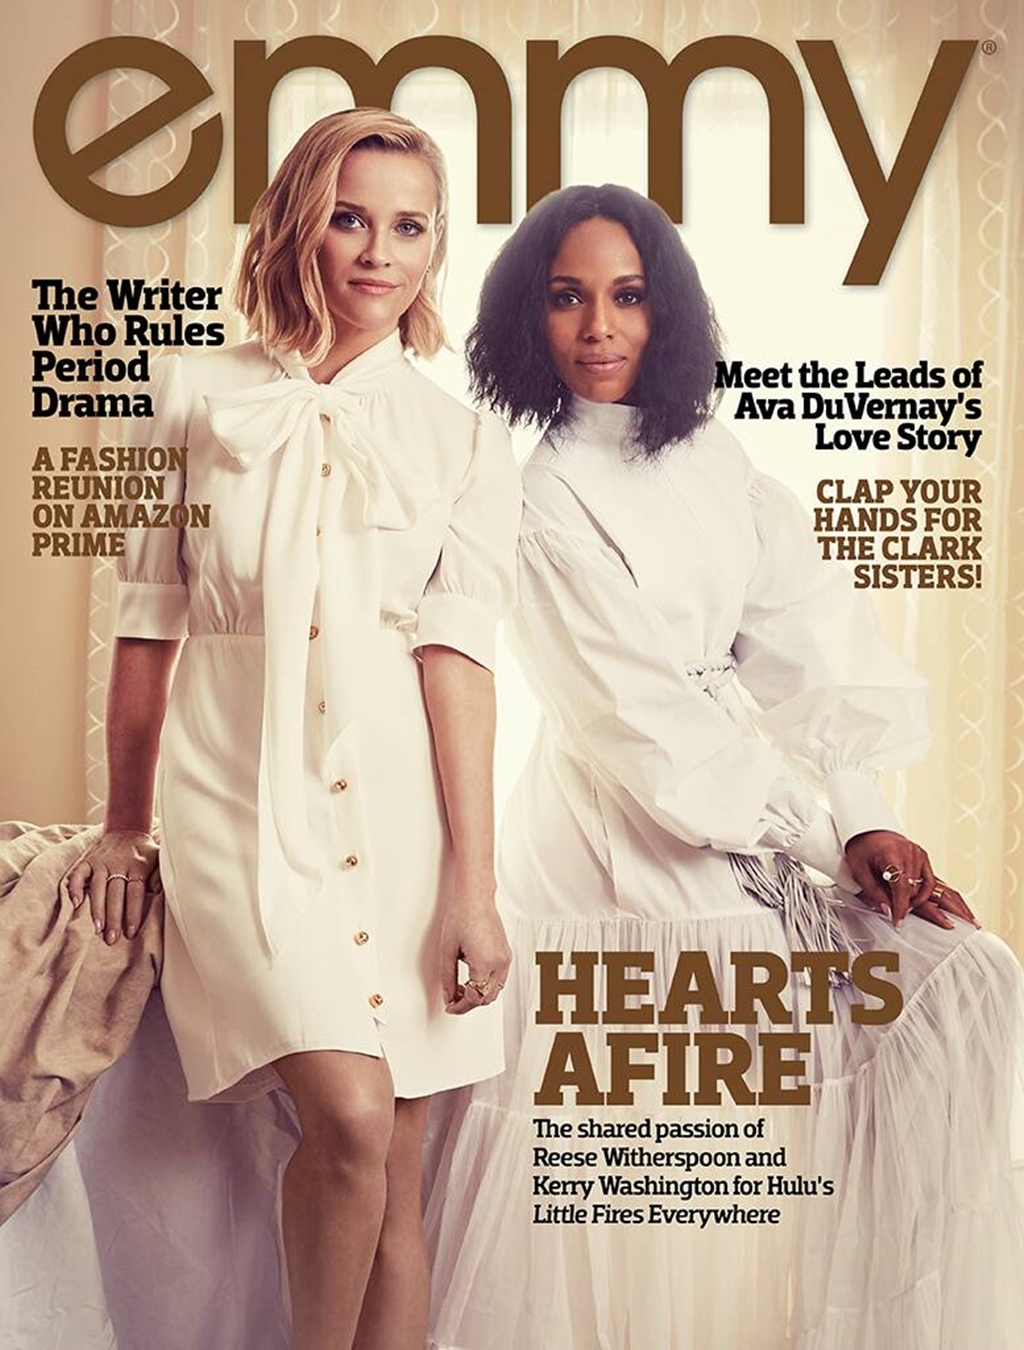 Reese Witherspoon and Kerry Washington Not Social Distancing!